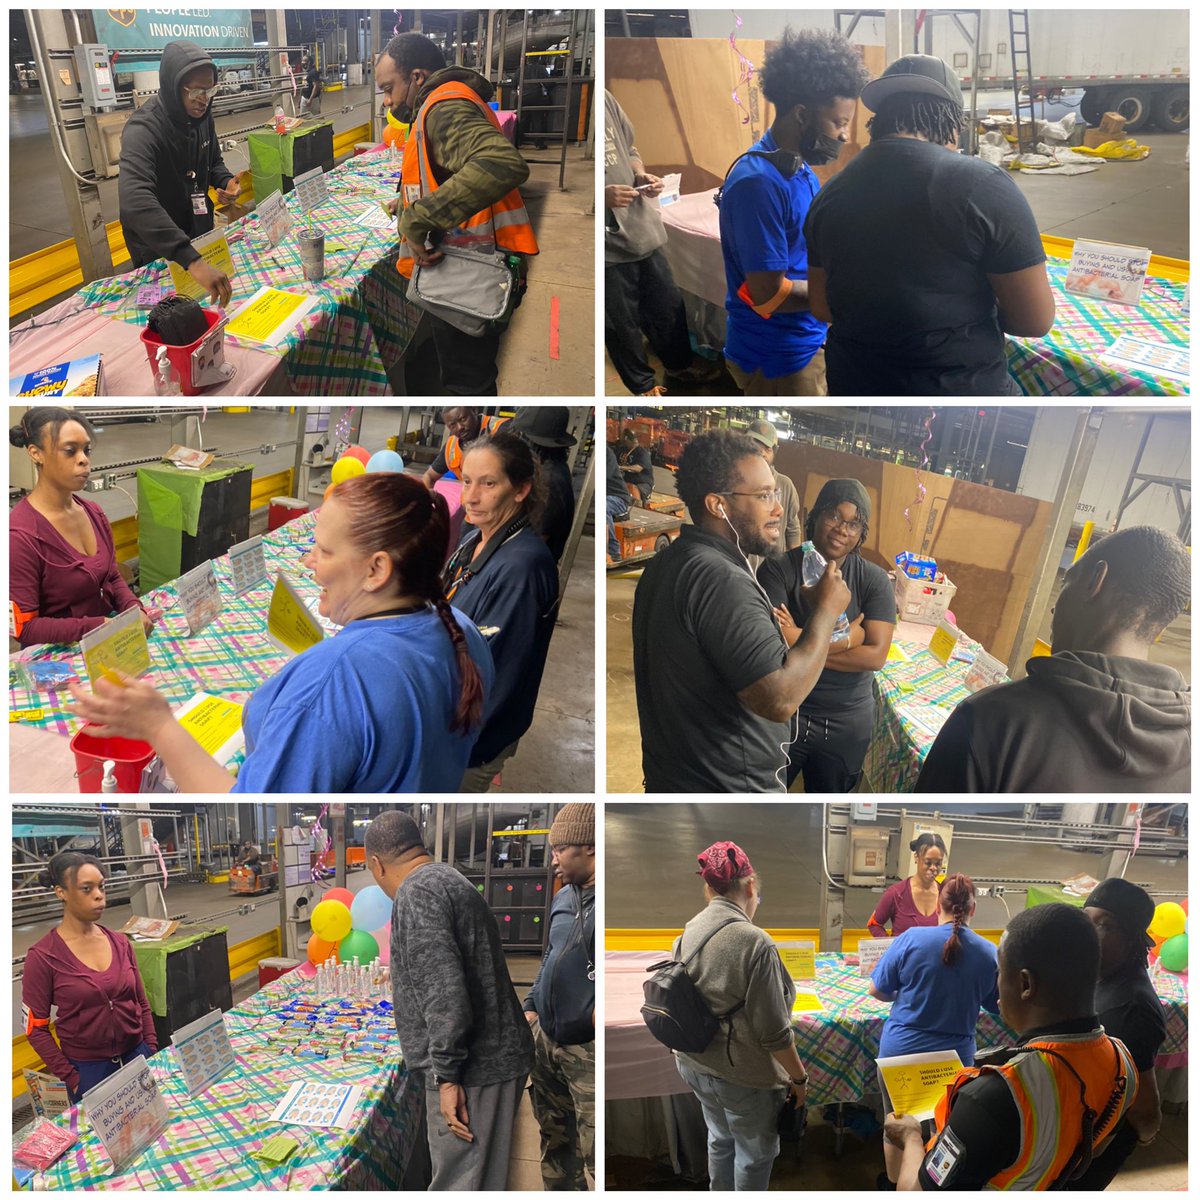 How “Well” do you wash🧼 your hands? PHL TWI Safety team wellness activity talked about spreading germs🦠 as we gave out facts on using anti-bacterial soaps and hand sanitizer ! #germs #safety #ups #wellness @RaymondChew95 @RayBarczak @BobKee6 @MichelleRobUPS @BarberRasheen